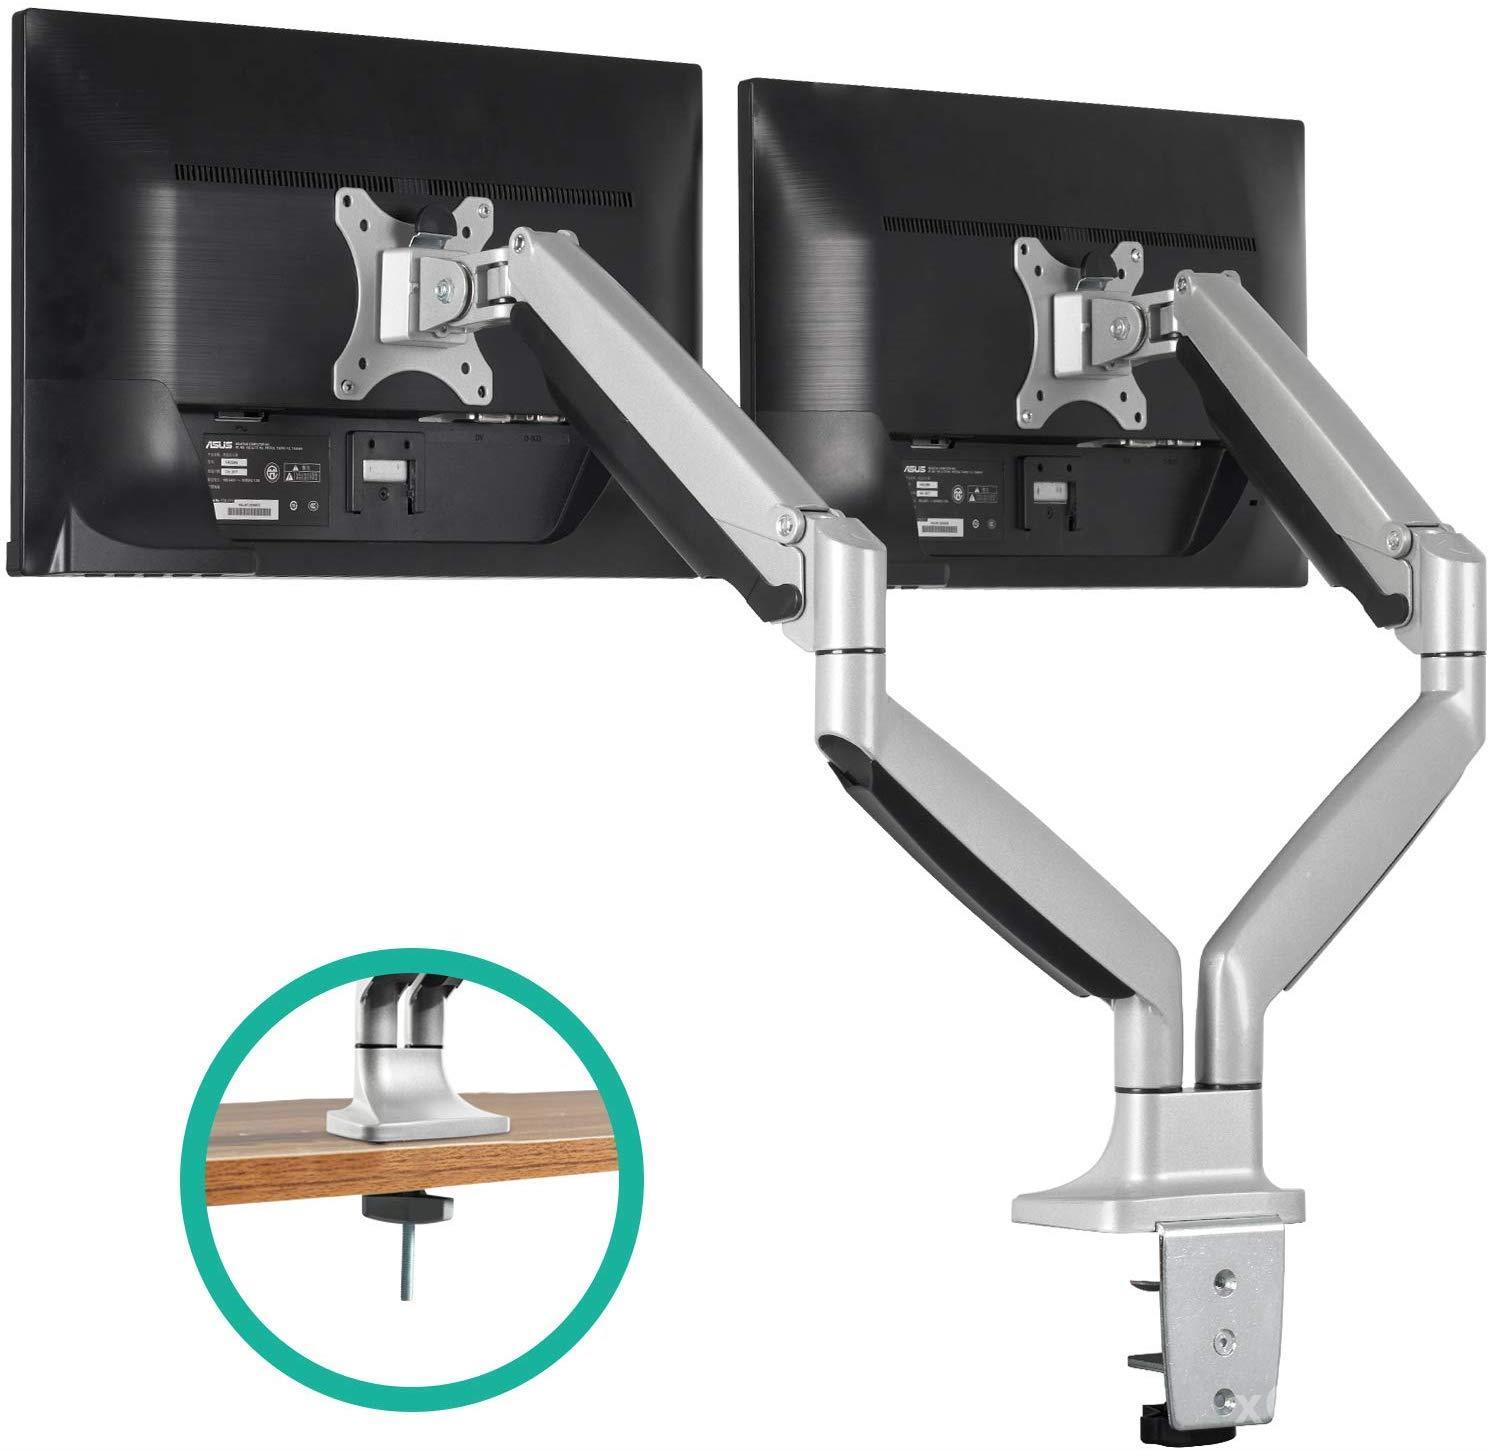 EleTab Dual Monitor Mount Stand - one of the best Dual Monitor Arm